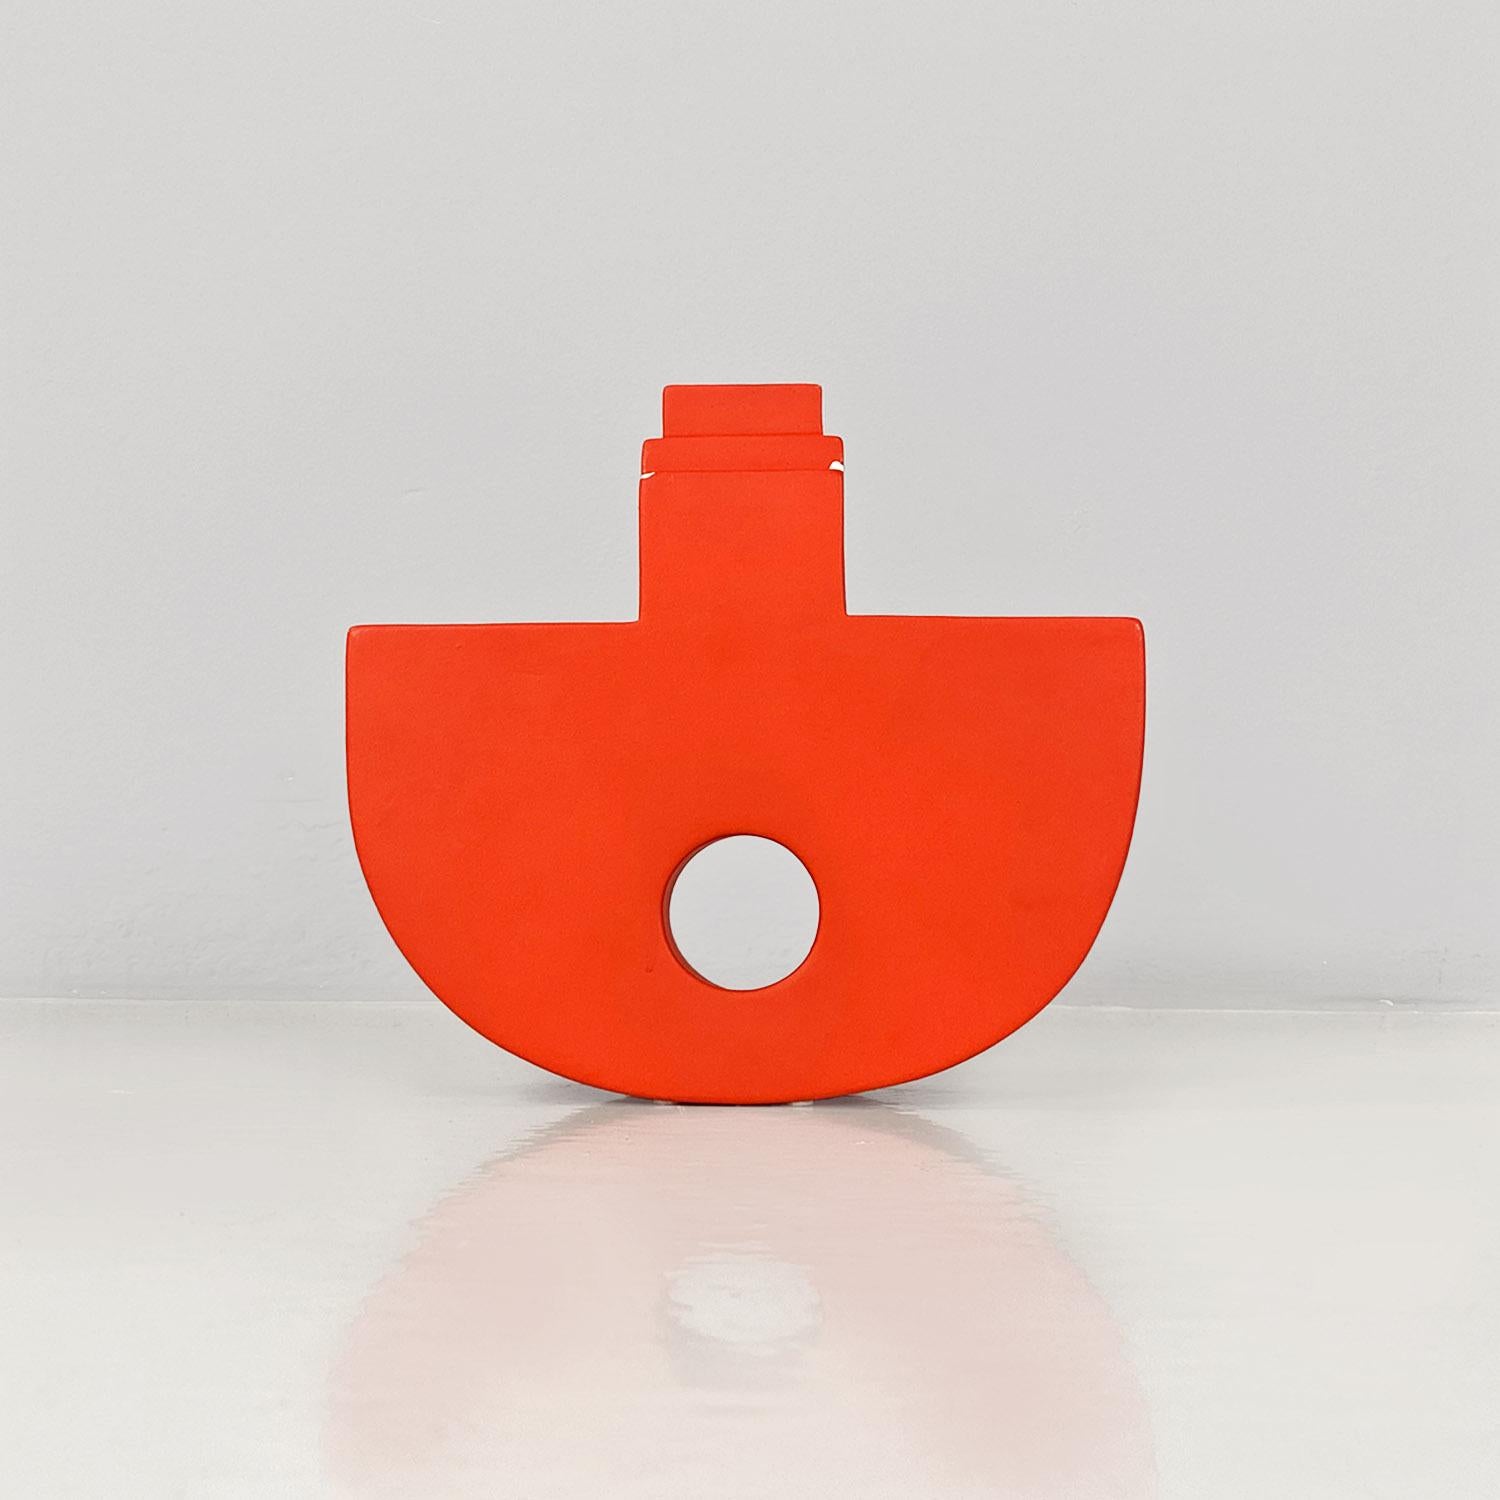 Post-Modern Italian modern red ceramic Dondolo sculpture vase by Florio Pac Paccagnella 2023 For Sale